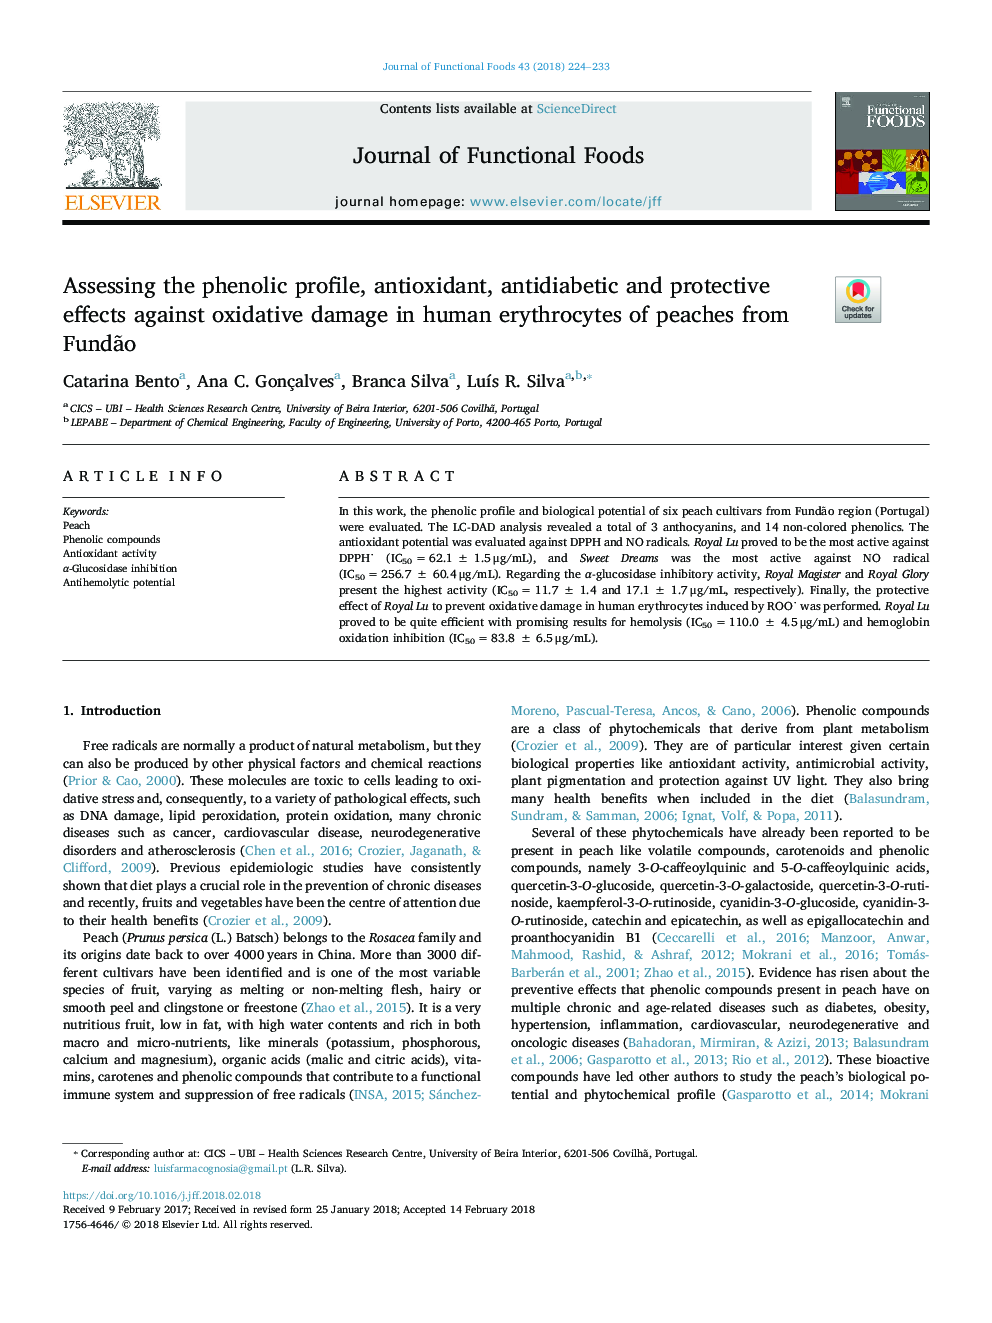 Assessing the phenolic profile, antioxidant, antidiabetic and protective effects against oxidative damage in human erythrocytes of peaches from FundÃ£o